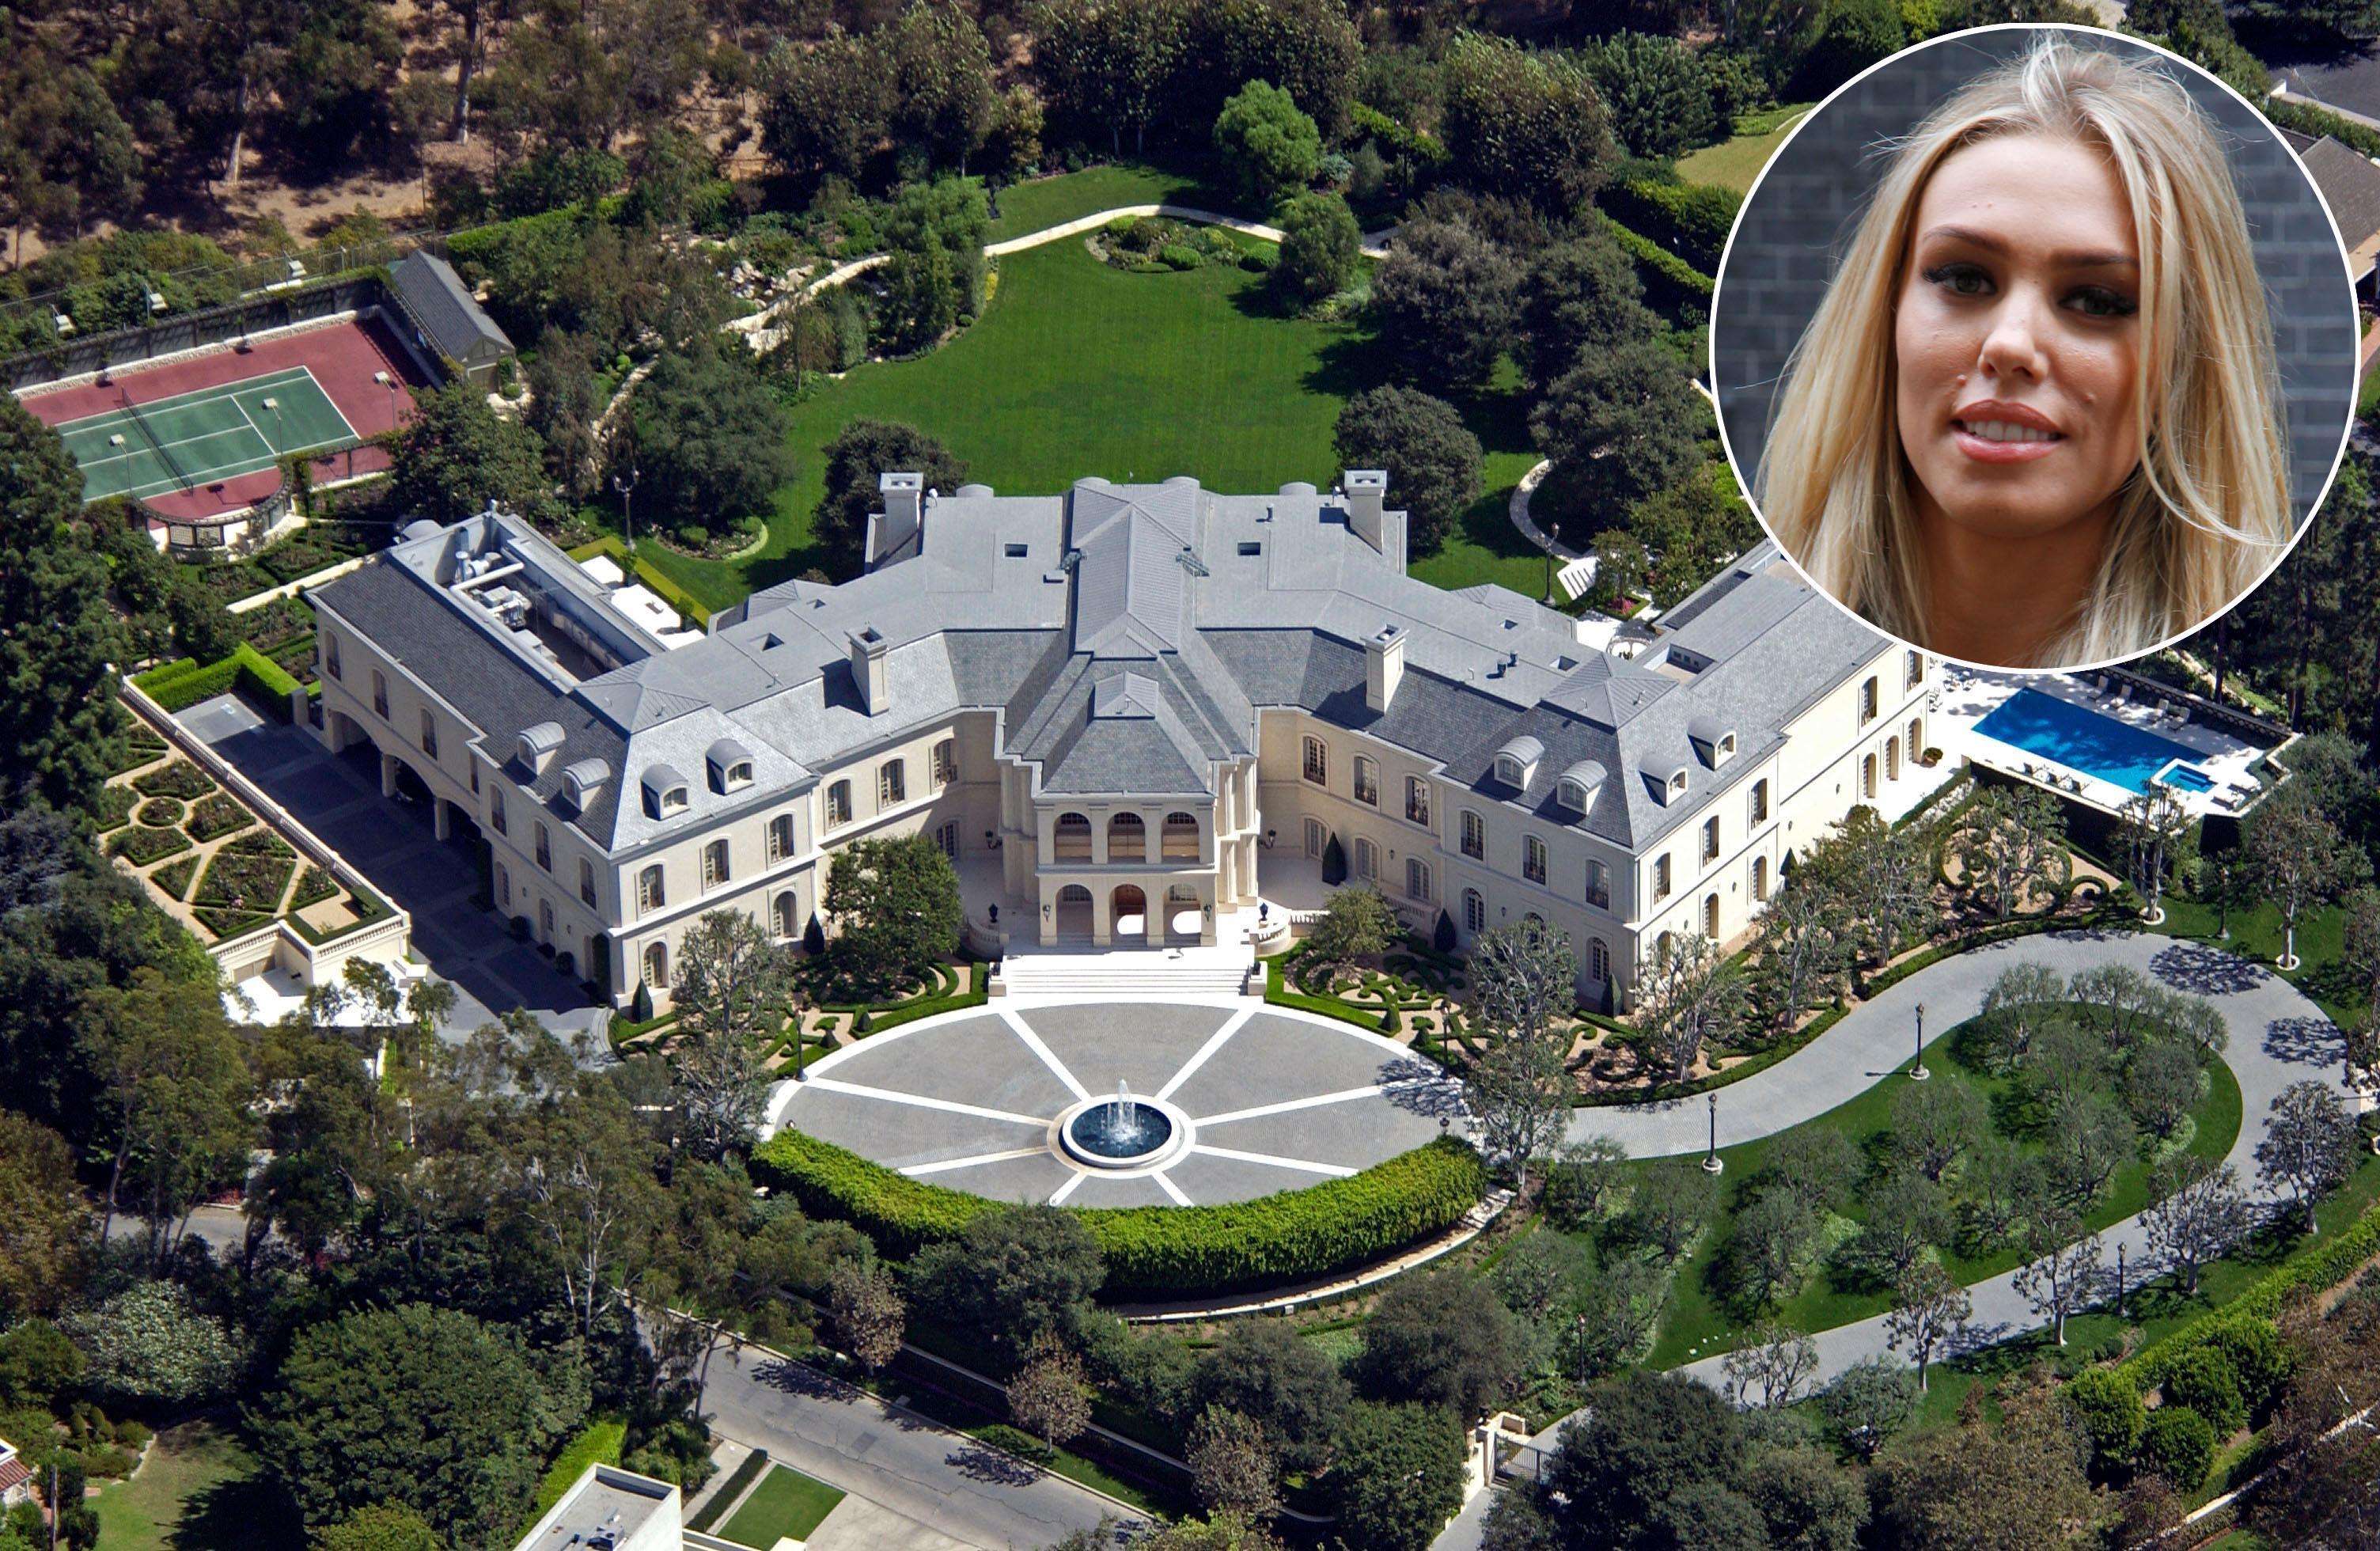 The Most Expensive Celebrity Homes - Best Design Idea